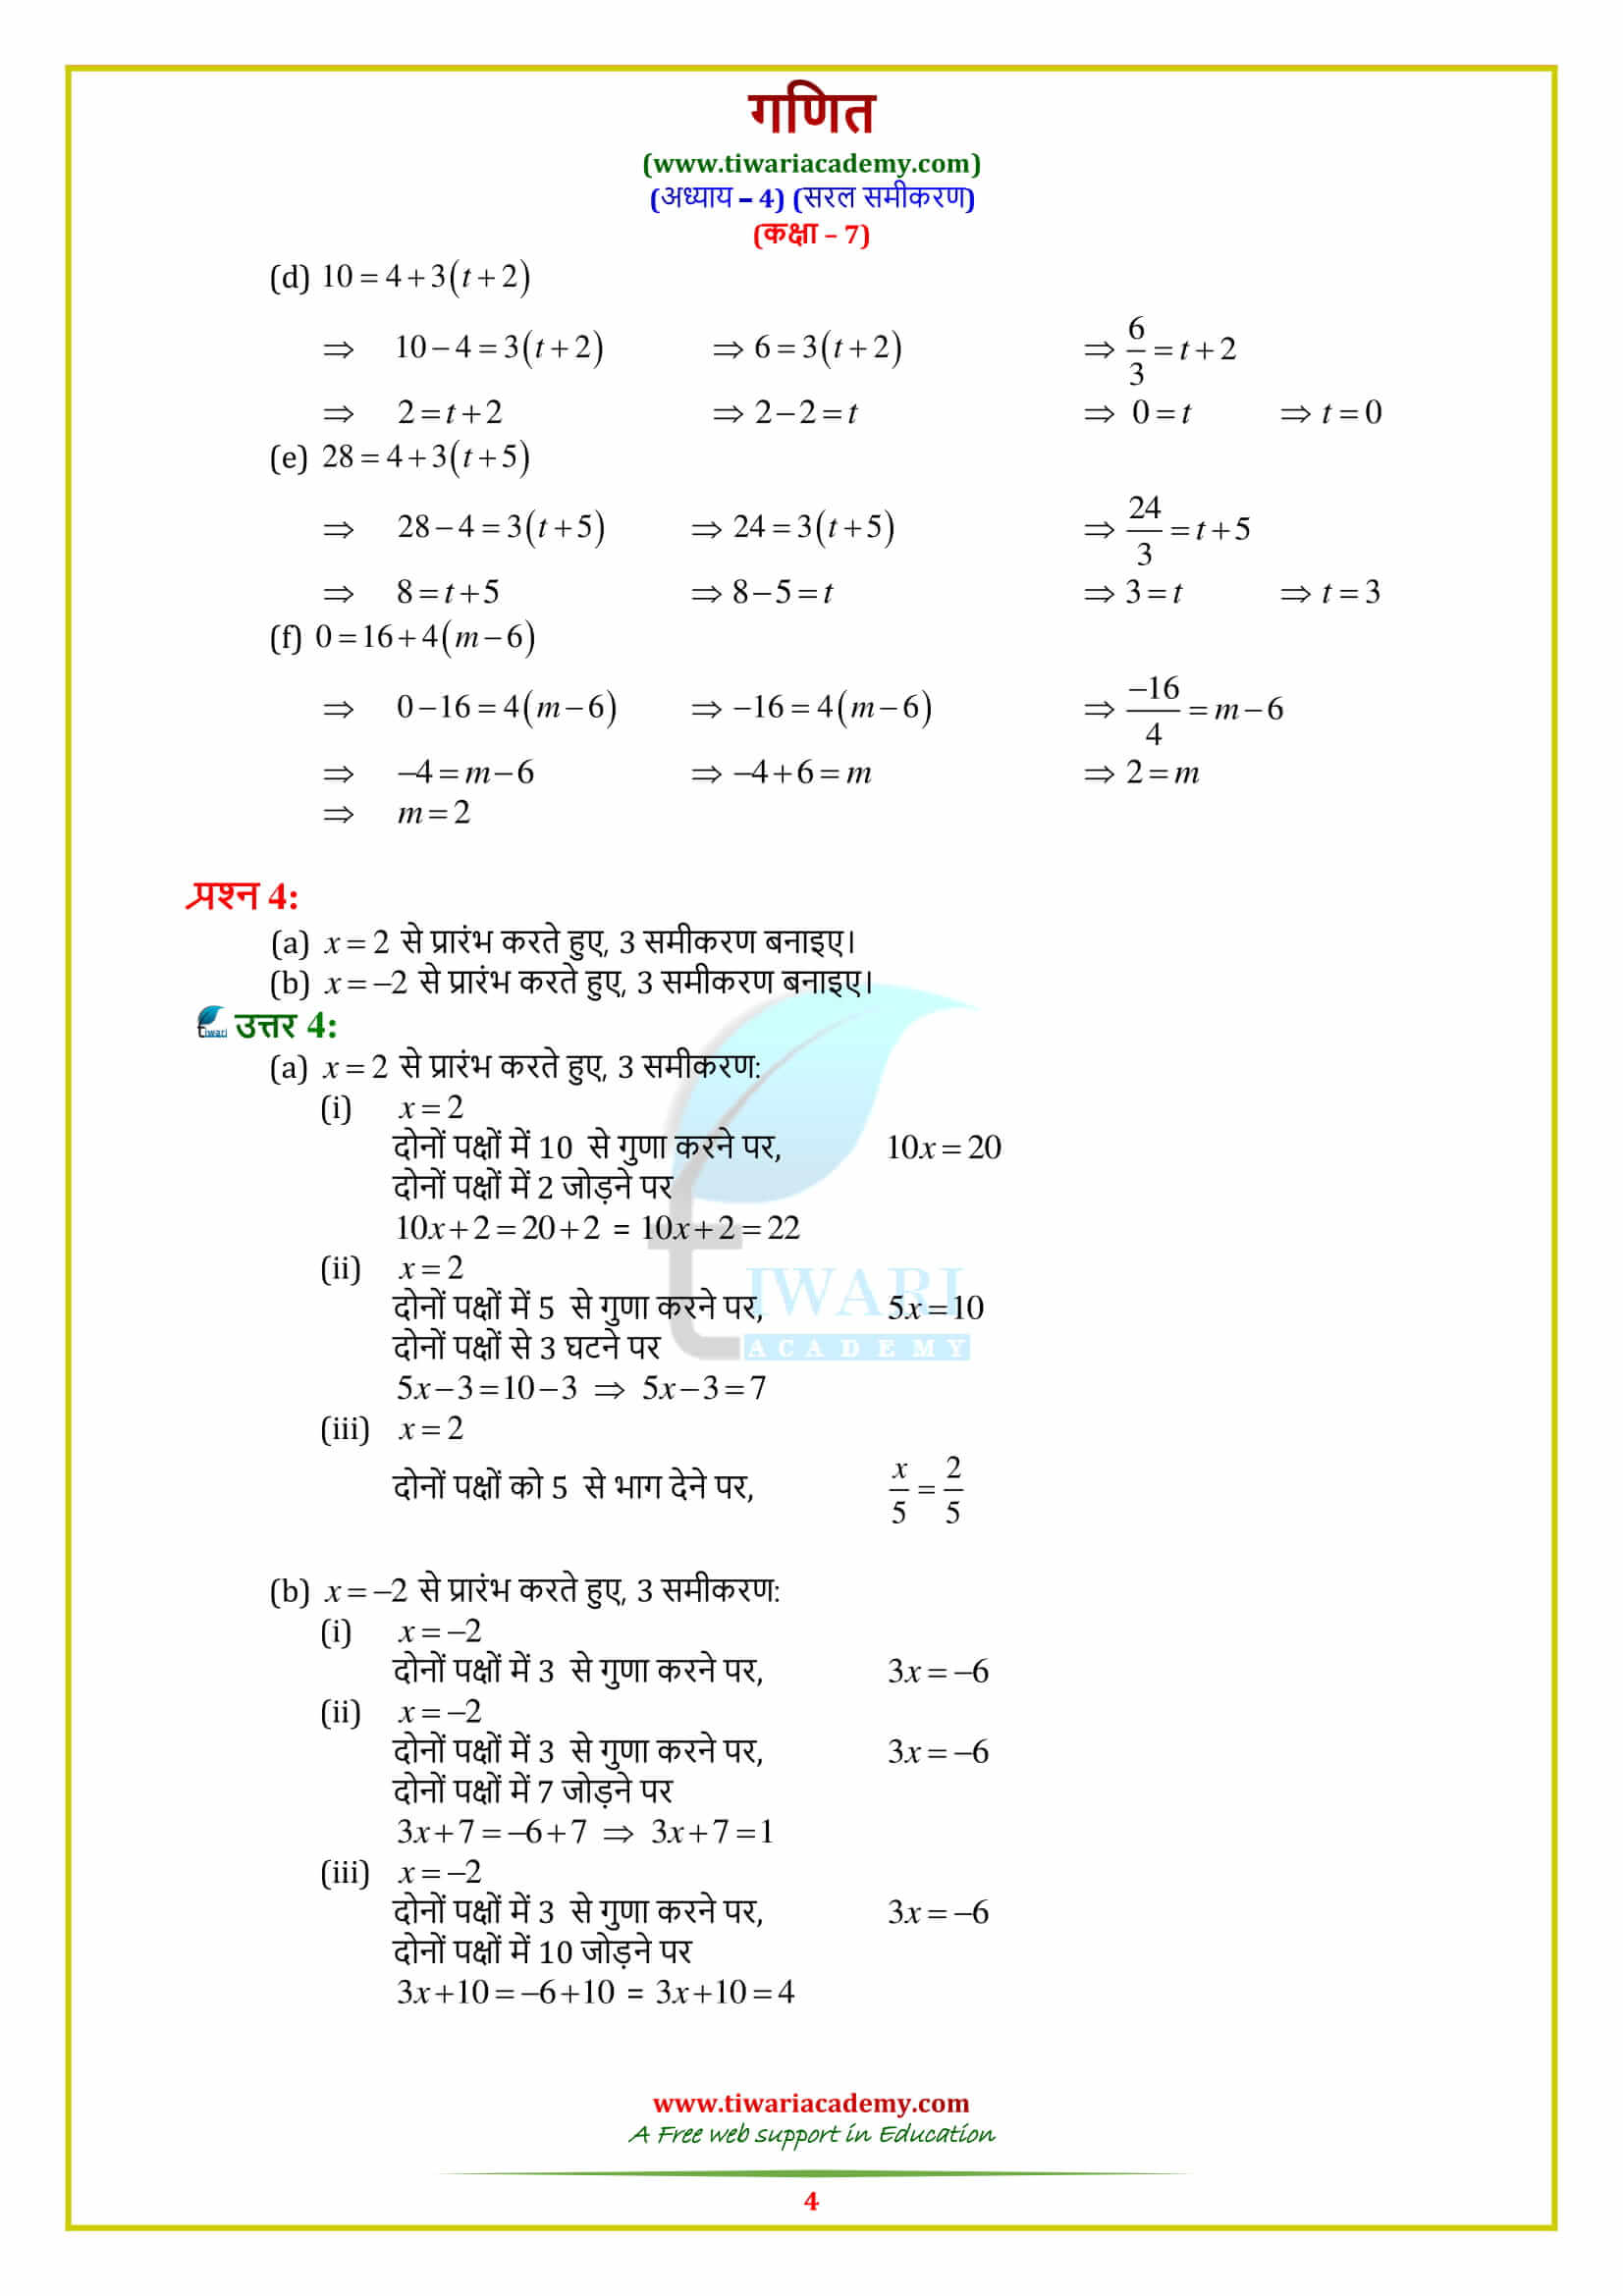 7 Maths Exercise 4.3 Solutions free download